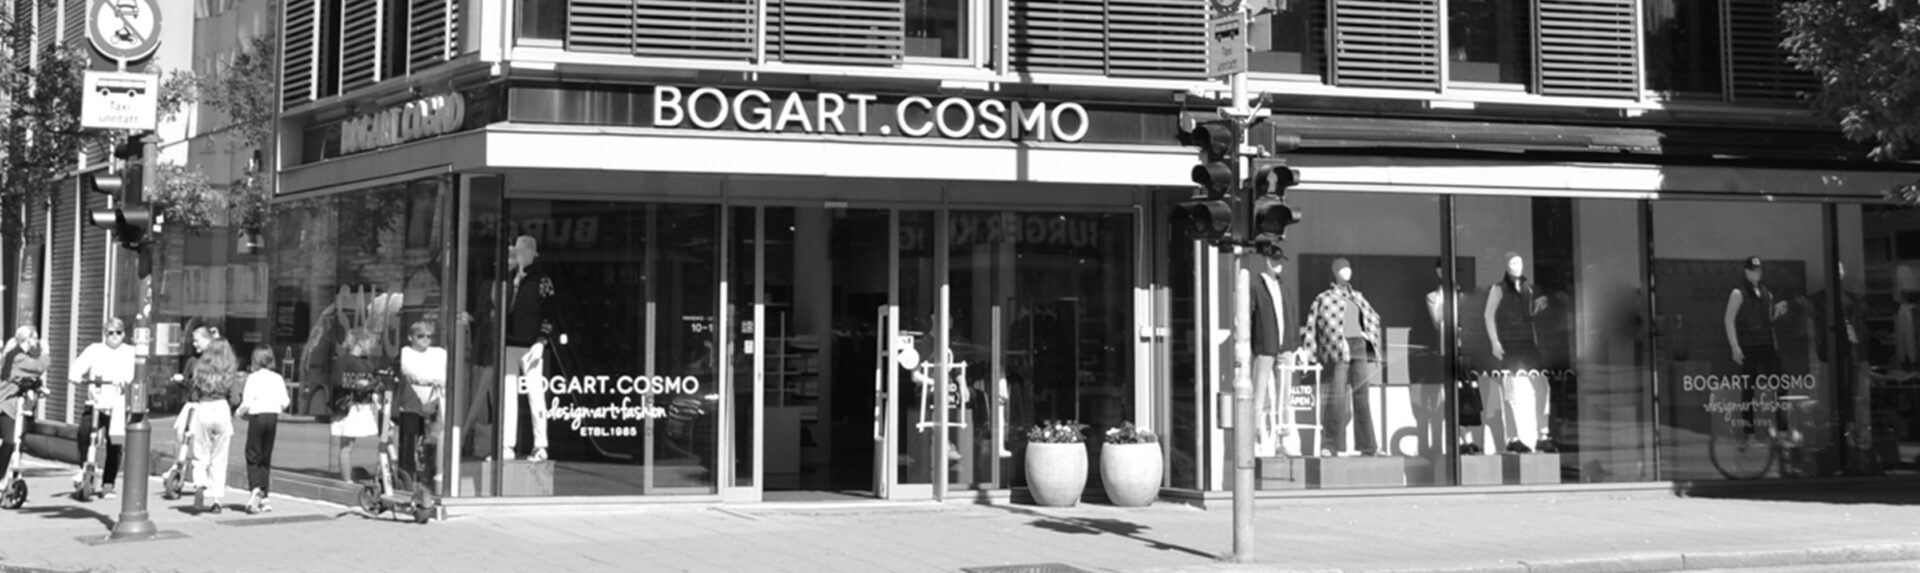 Featured image for “Bogart.Cosmo”